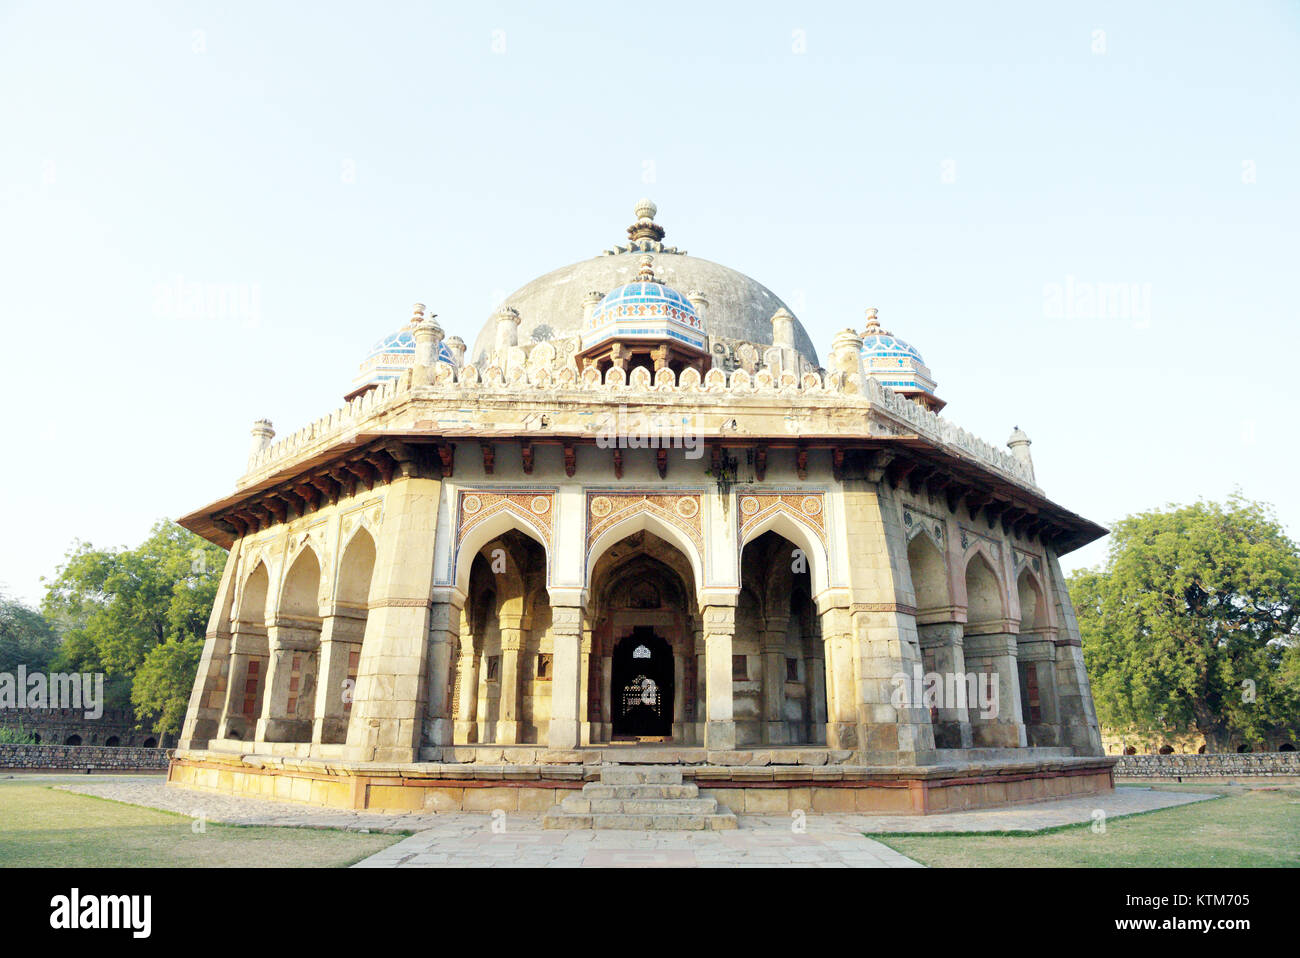 Tomb of Isa Khan Niazi. Isa Khan Niazi was a nobleman in the court of Sher Shah Suri. It was constructed in 1547. Stock Photo